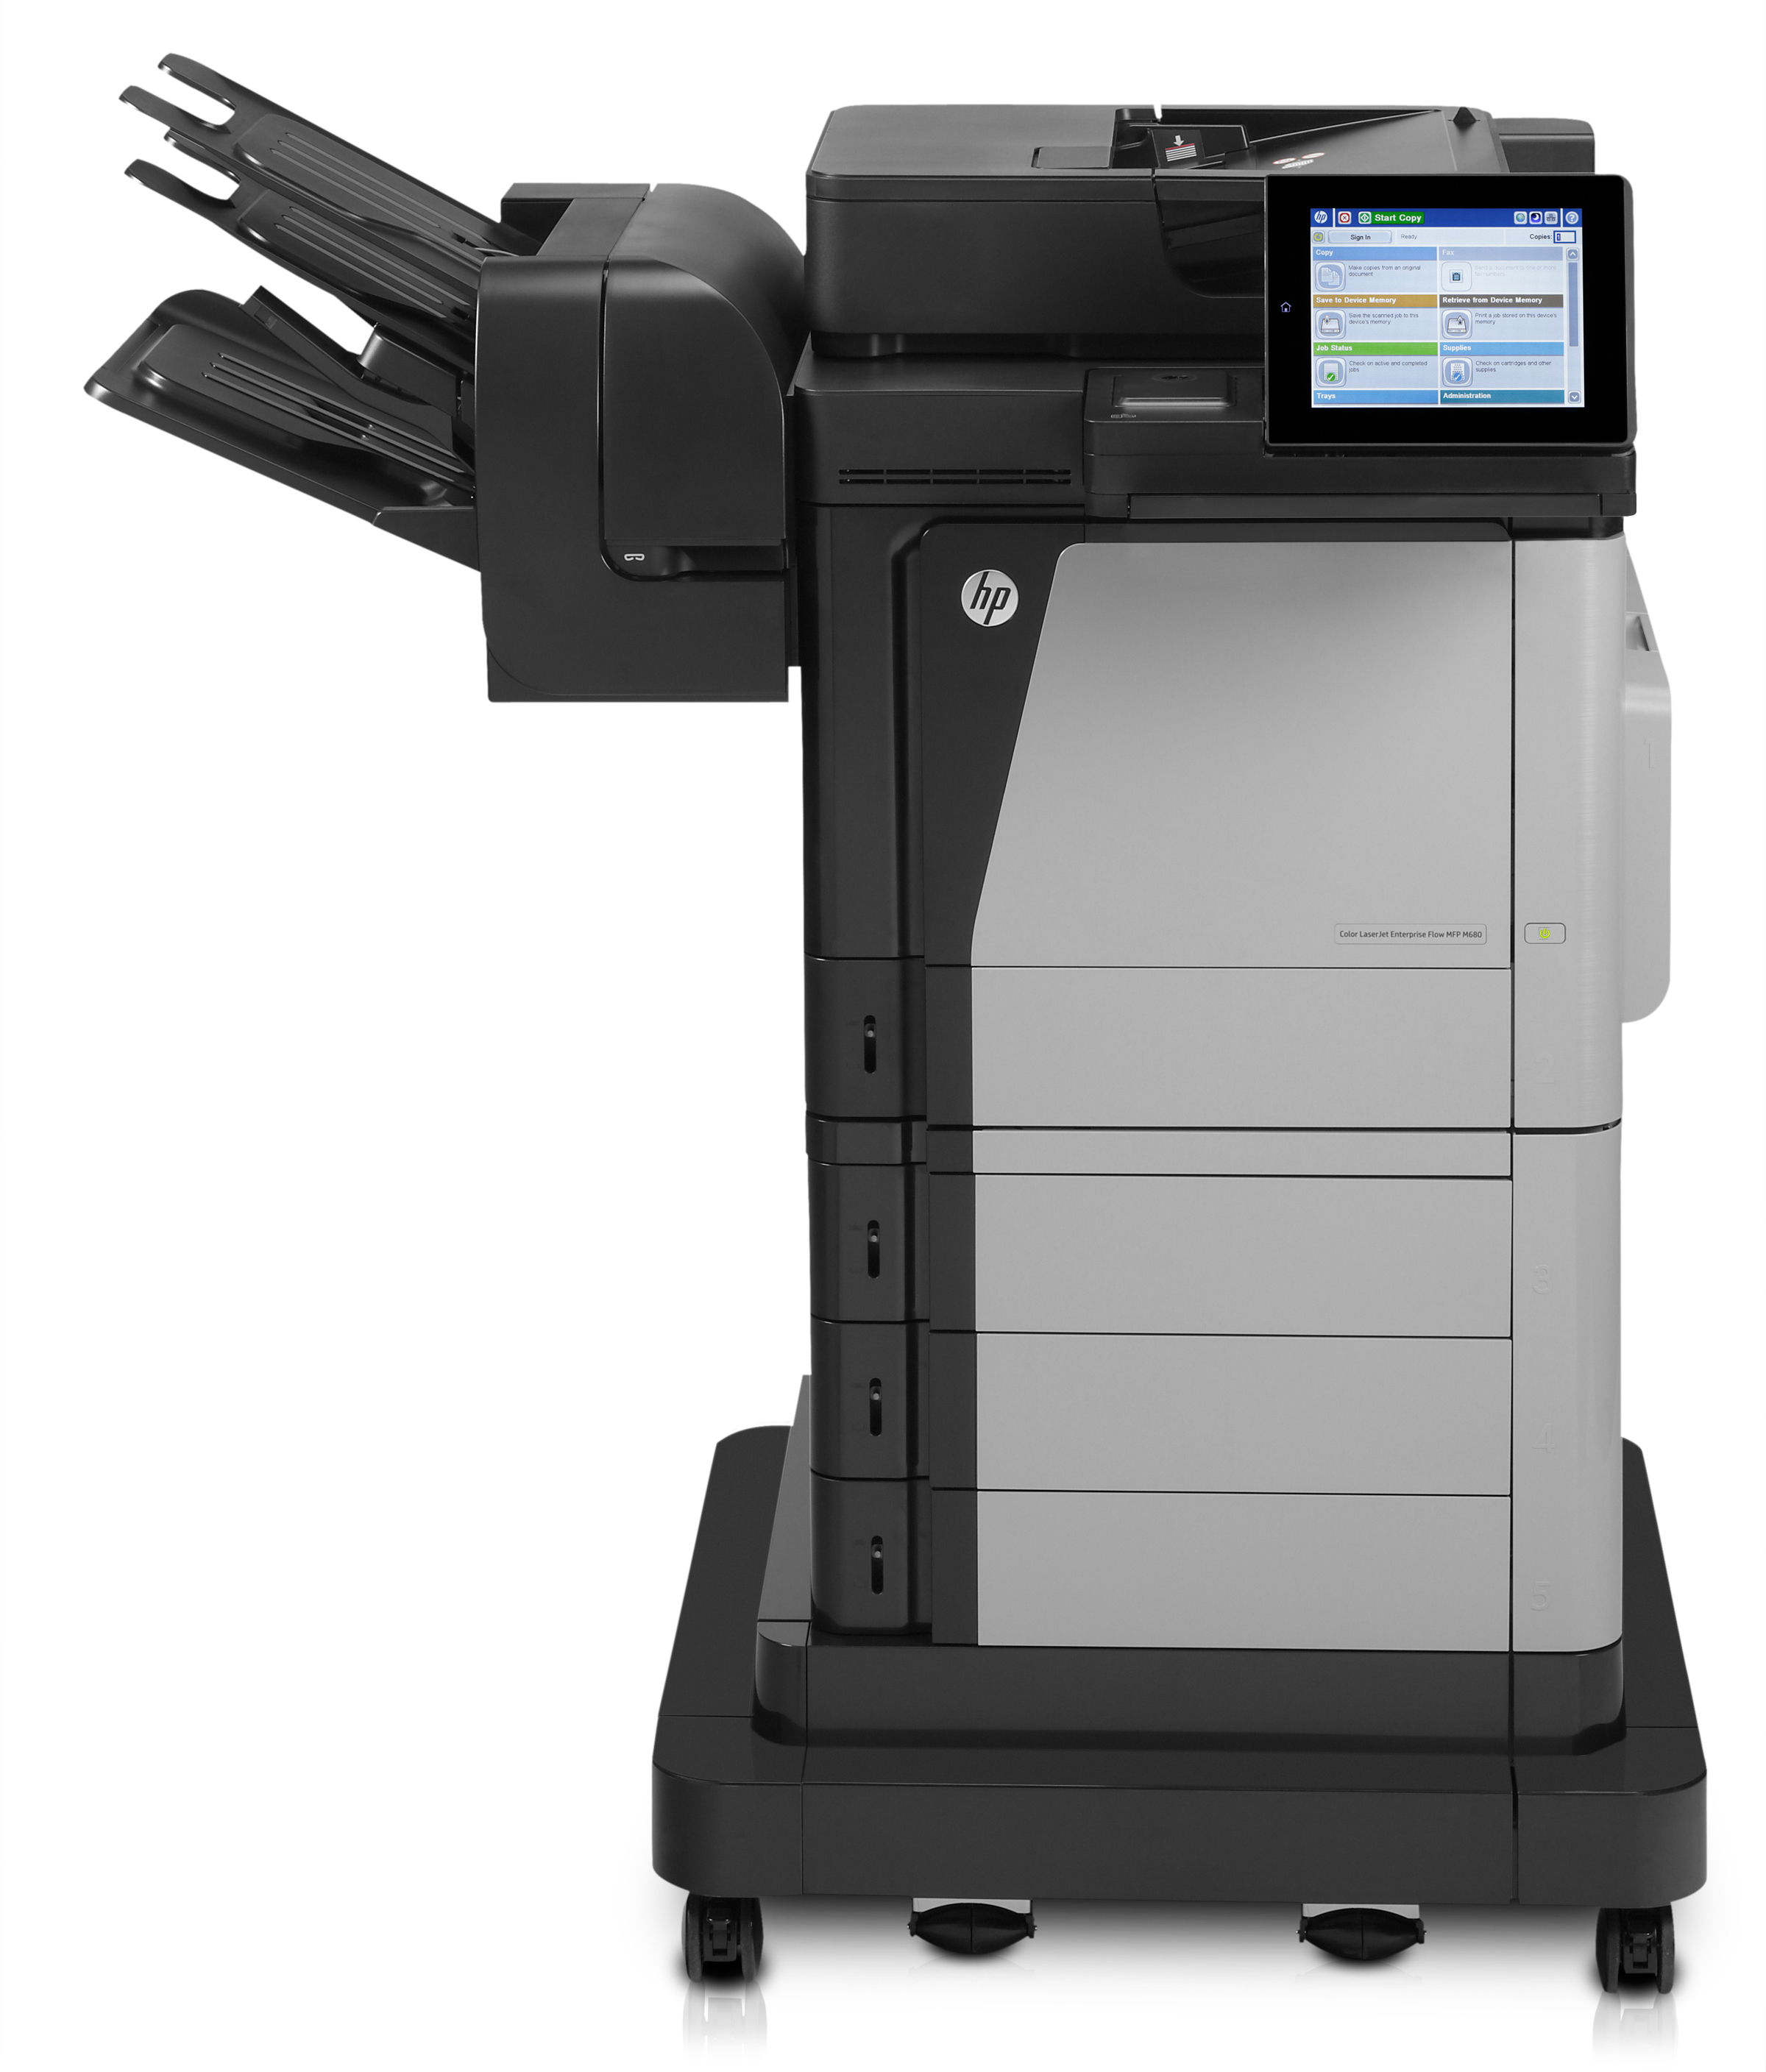 ophobe Atlantic Behov for HP launches NFC authentication for enterprise printing | BetaNews